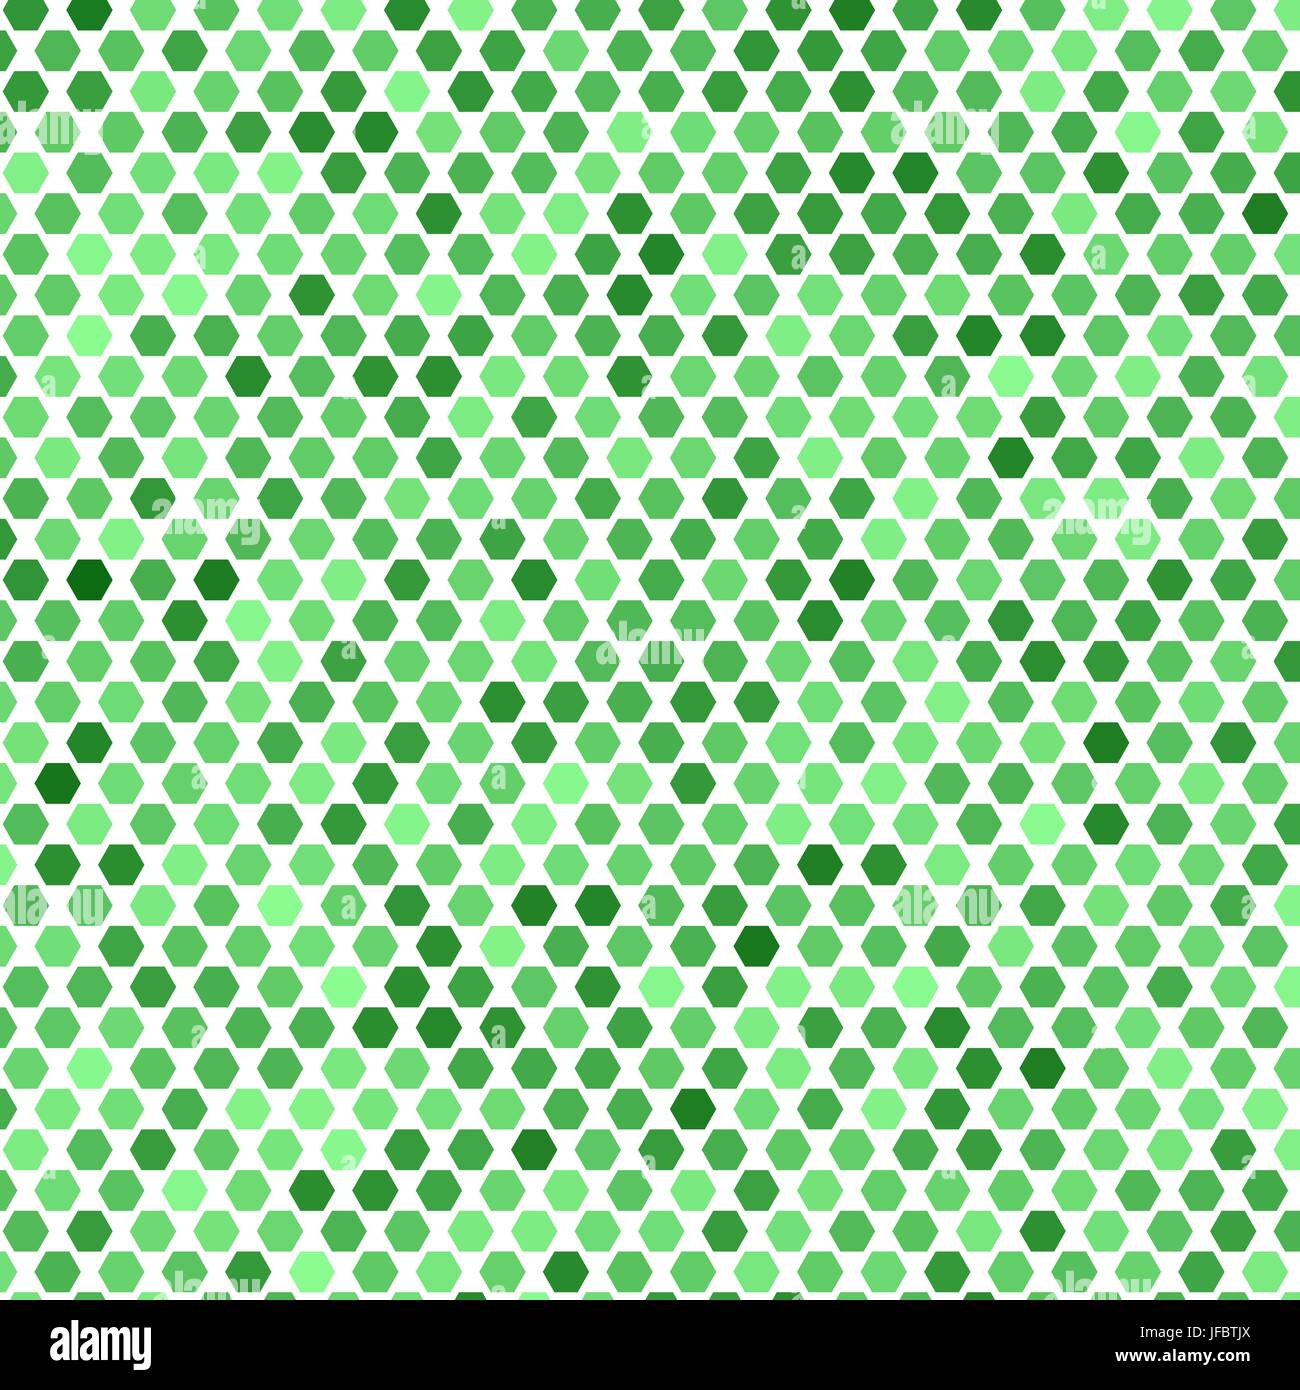 Abstract Elegant Green Background. Abstract Green Mosaic Pattern Stock ...